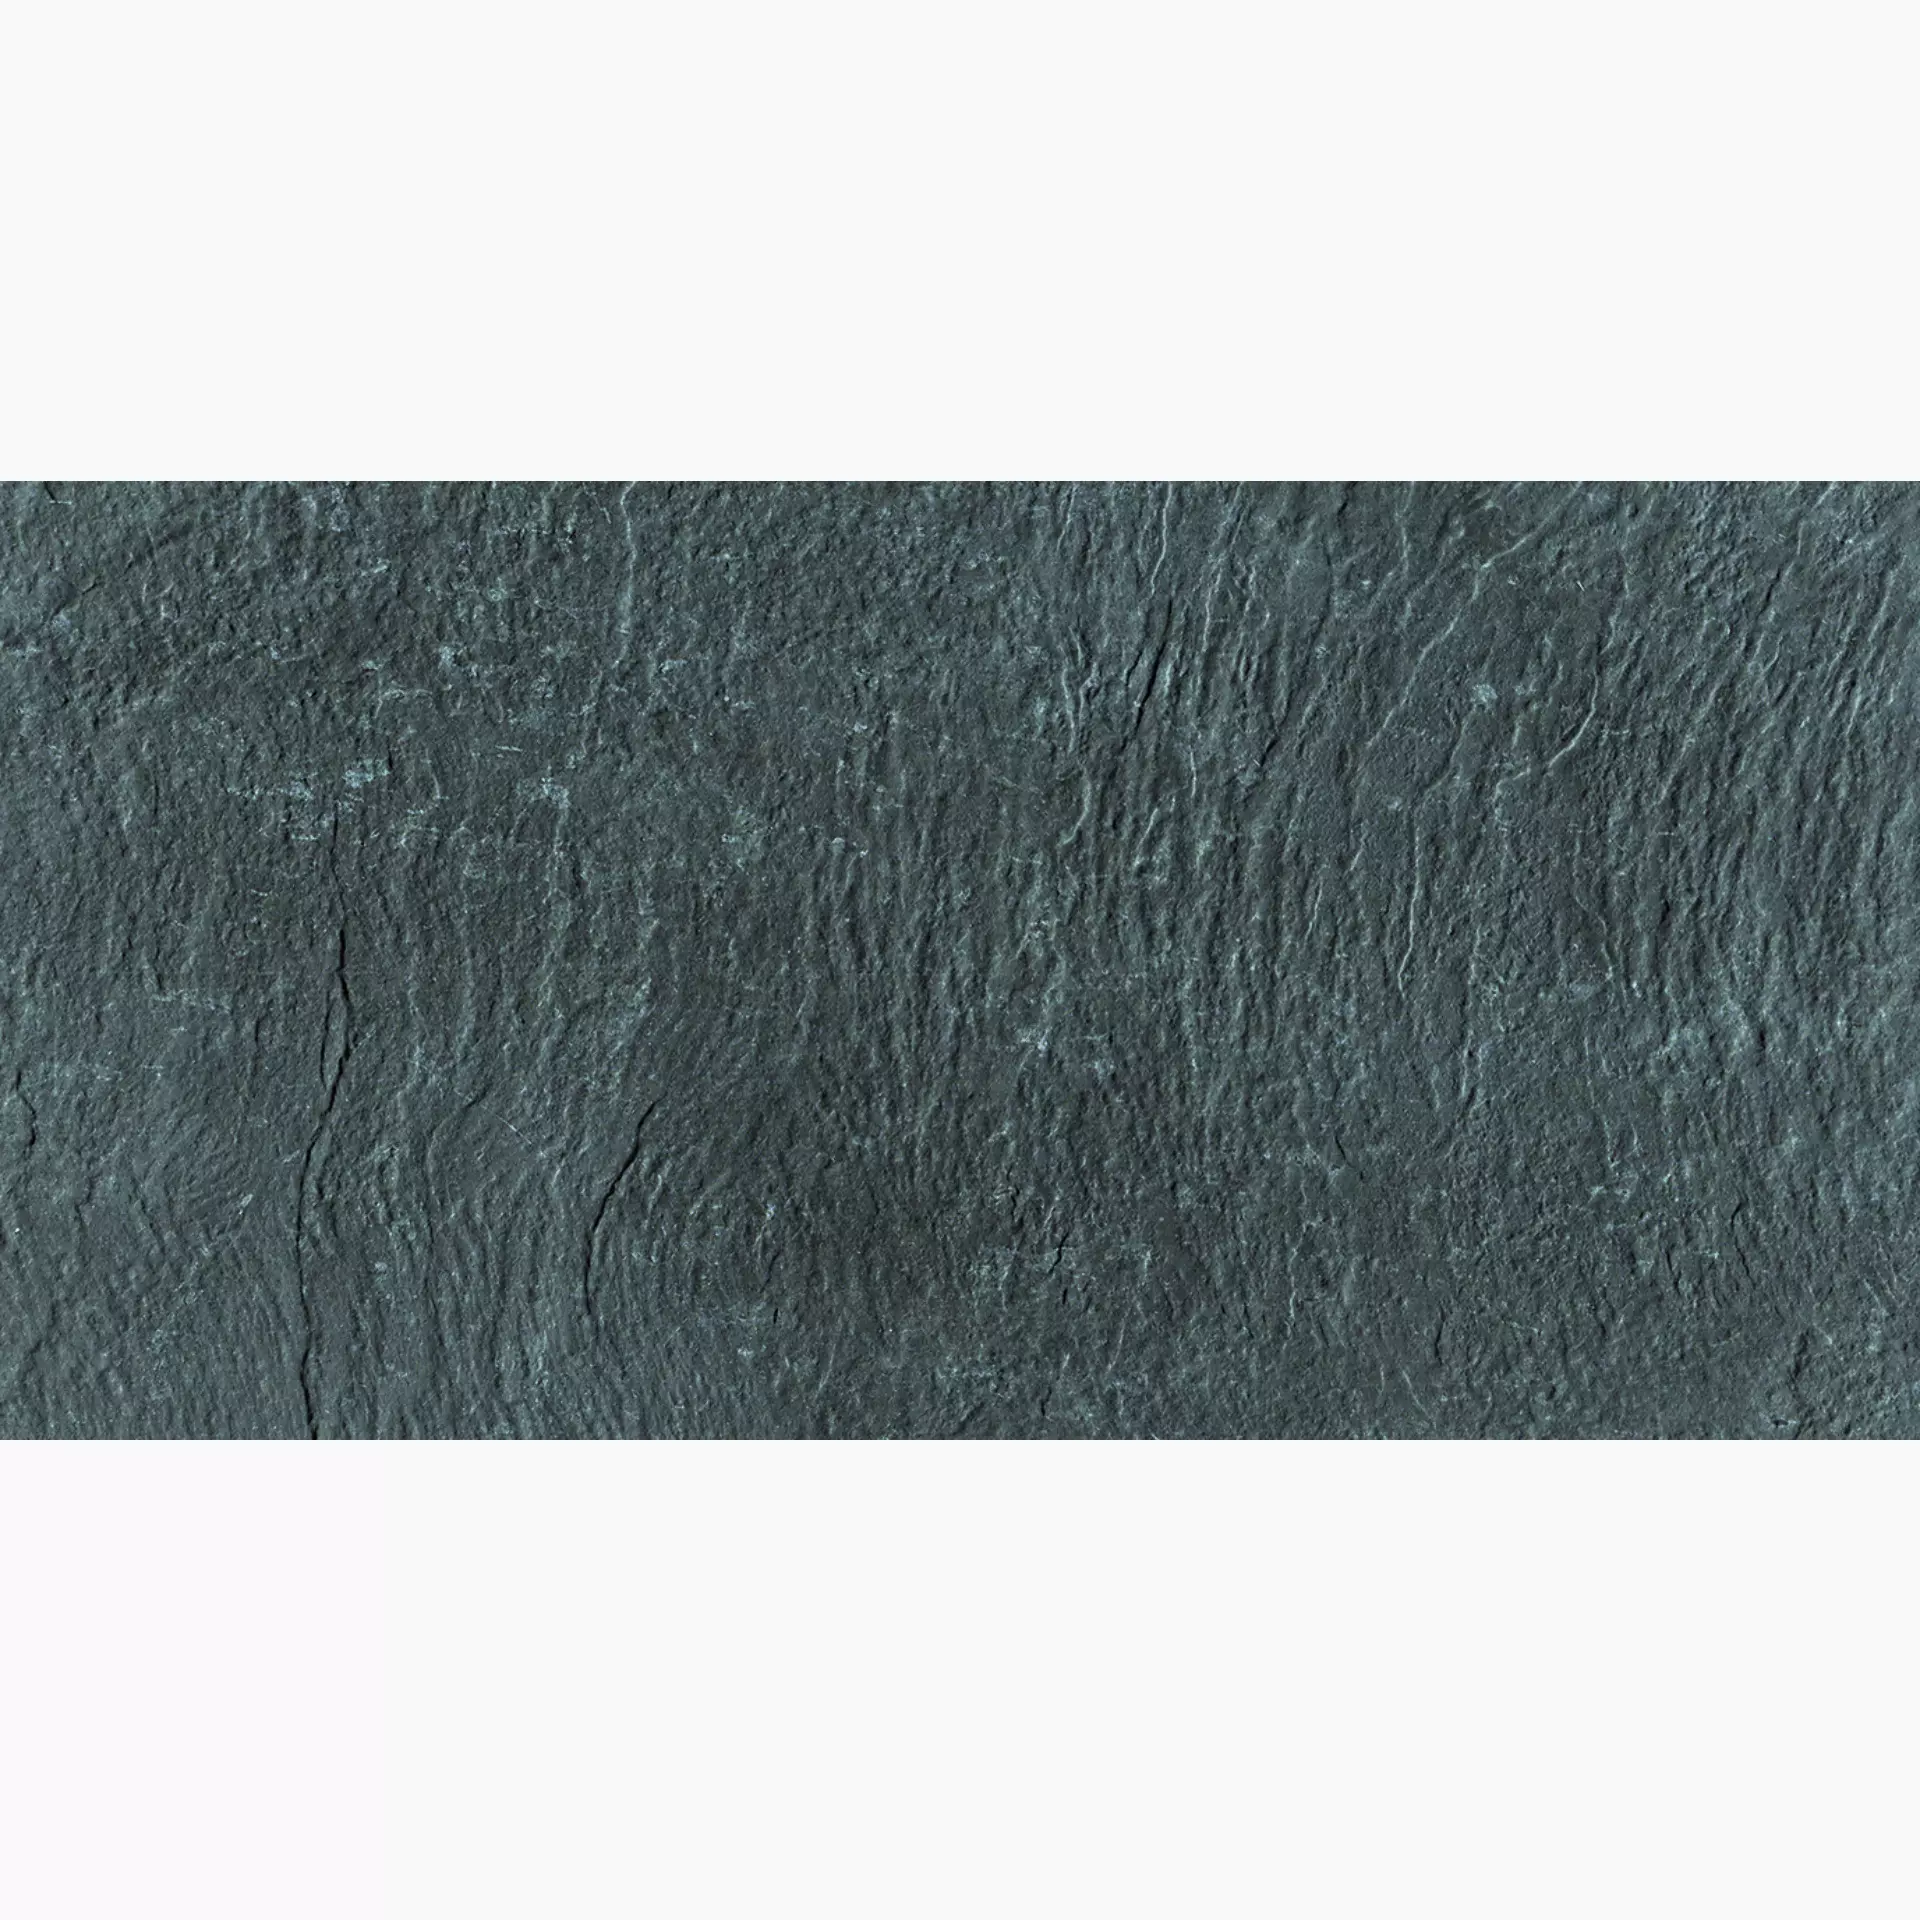 Cercom Stone Box Multicolor Selected Naturale 1055740 30x60cm rectified 9,5mm